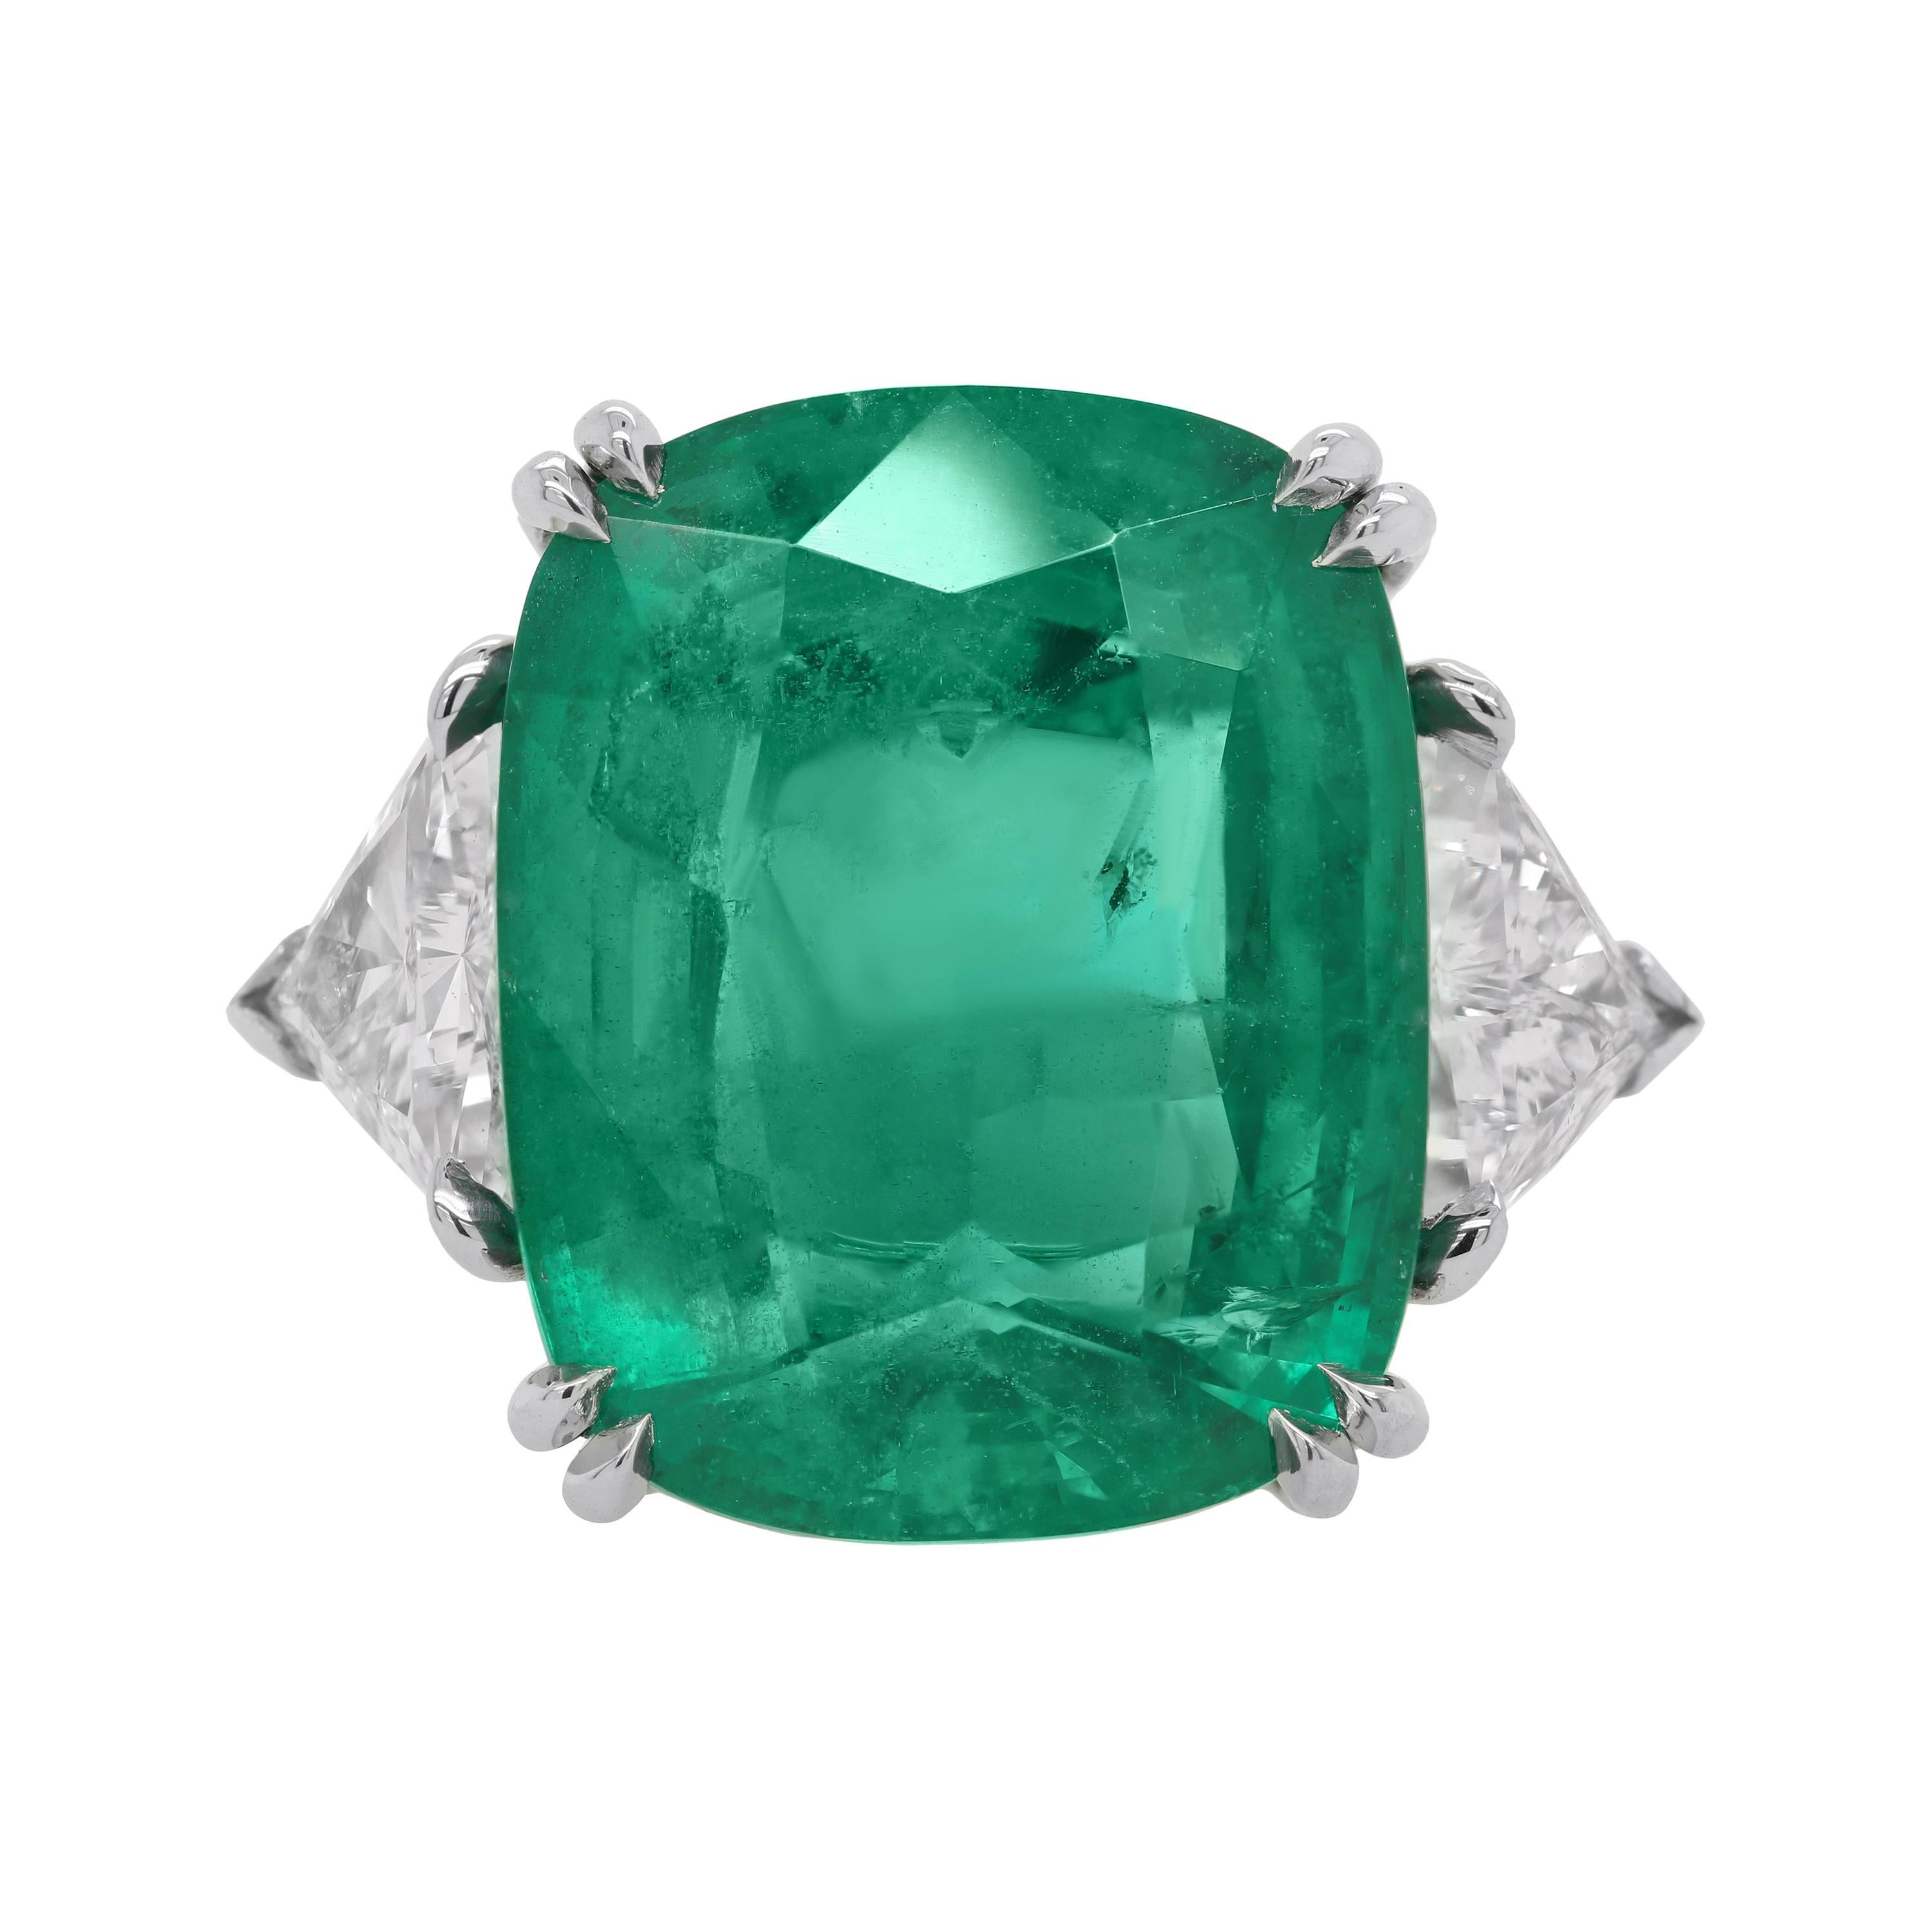 Platinum Emerald 15.85 Carat Ring with GIA Certified Stone